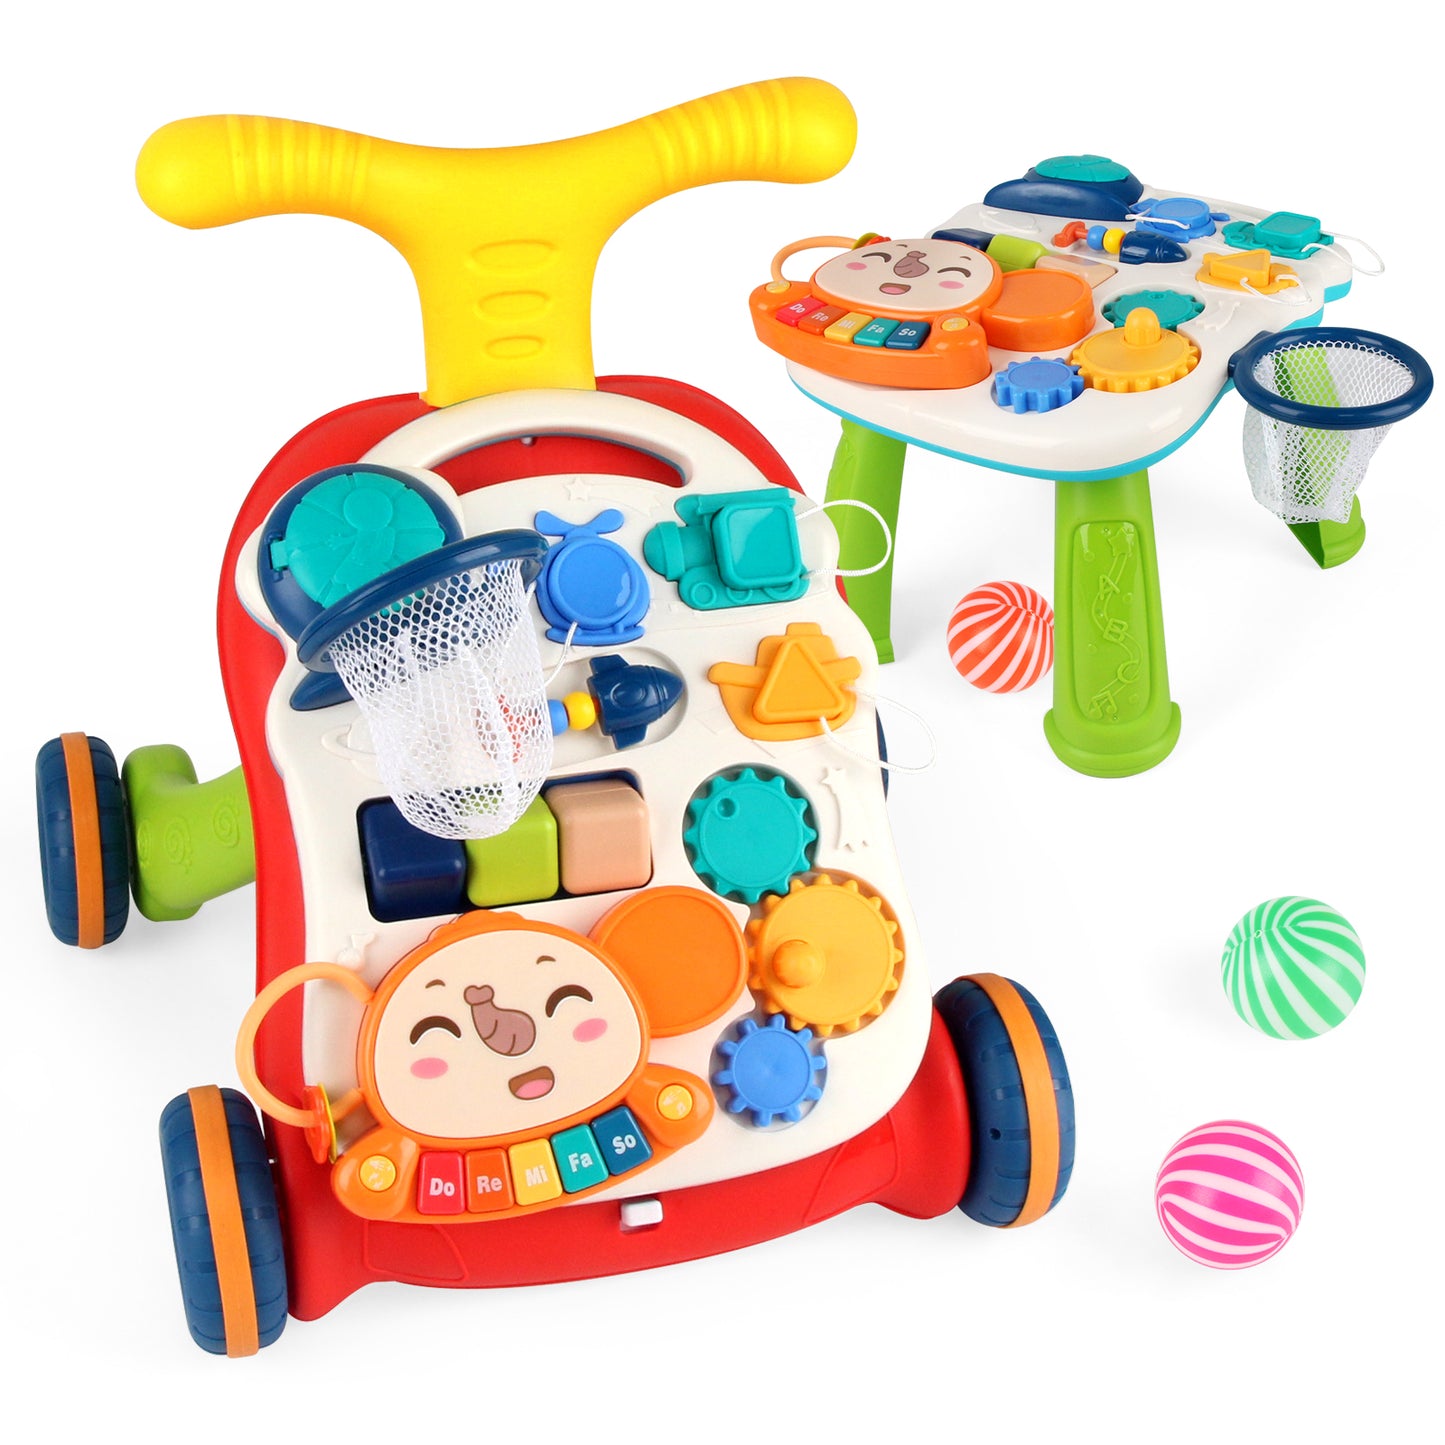 Joyfia Sit-to-Stand Learning Walker, Baby Walker with Musical Play Table and Activity Center, 3 in 1 Push & Pull Baby Walking Toy, Early Educational Toy Gift for Kids Infants Boys Girls